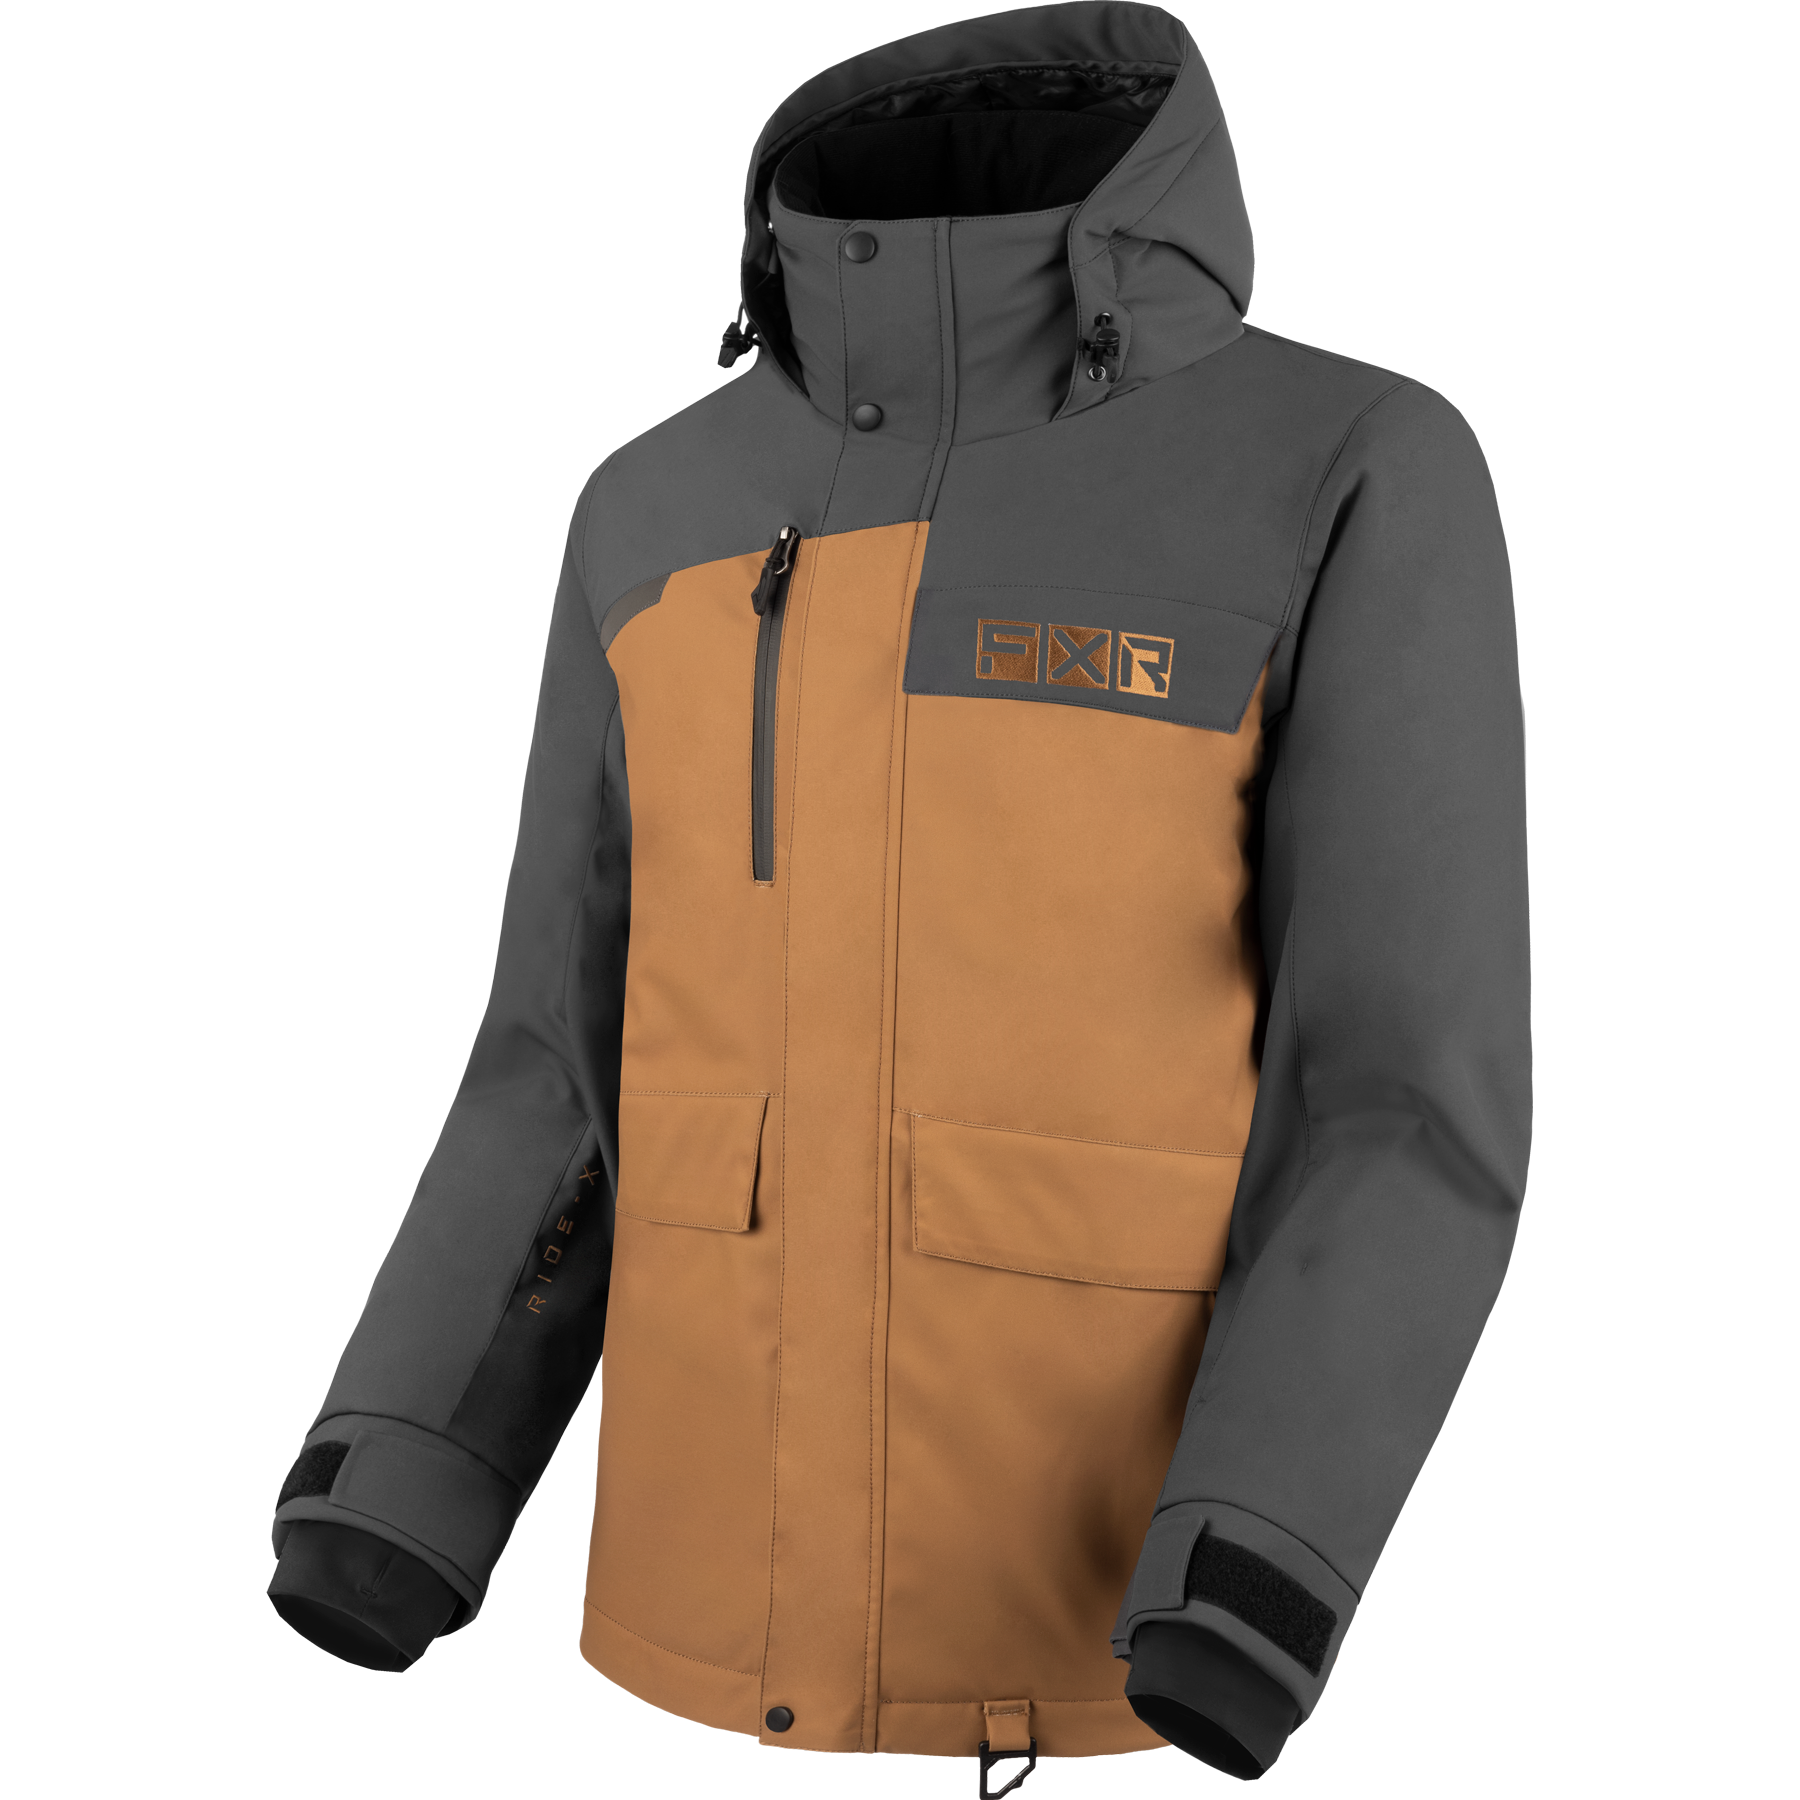 fxr racing jackets  chute insulated - snowmobile